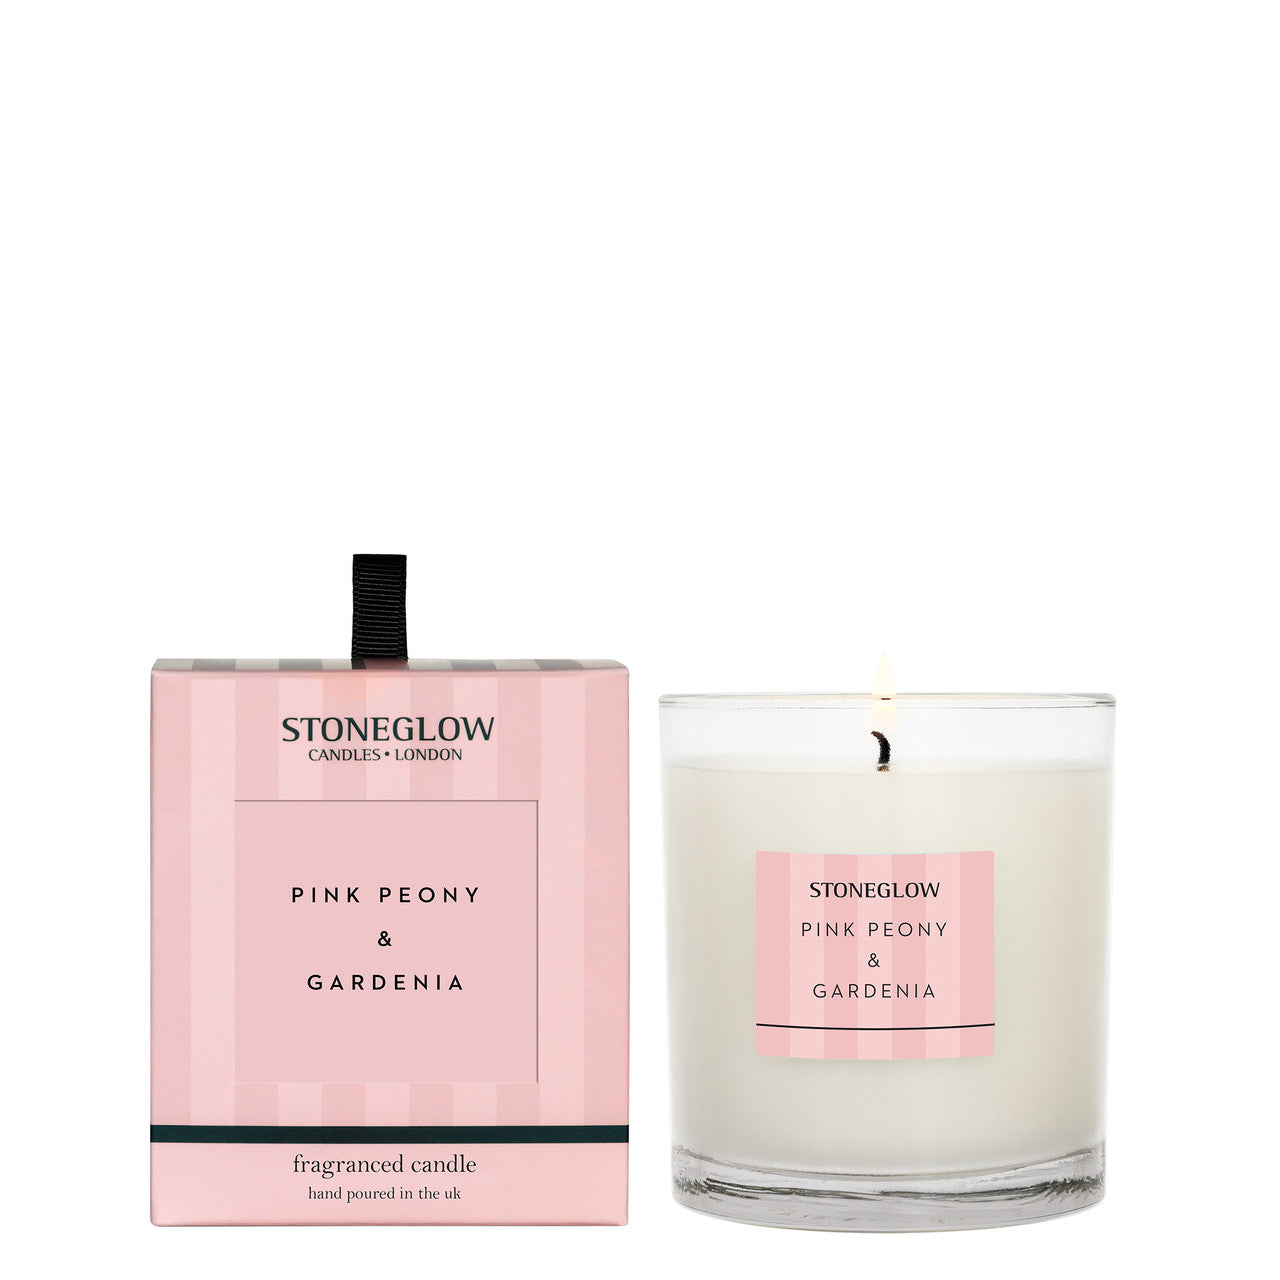 STONEGLOW PINK PEONY & GARDENIA - SCENTED CANDLE - BOXED TUMBLER